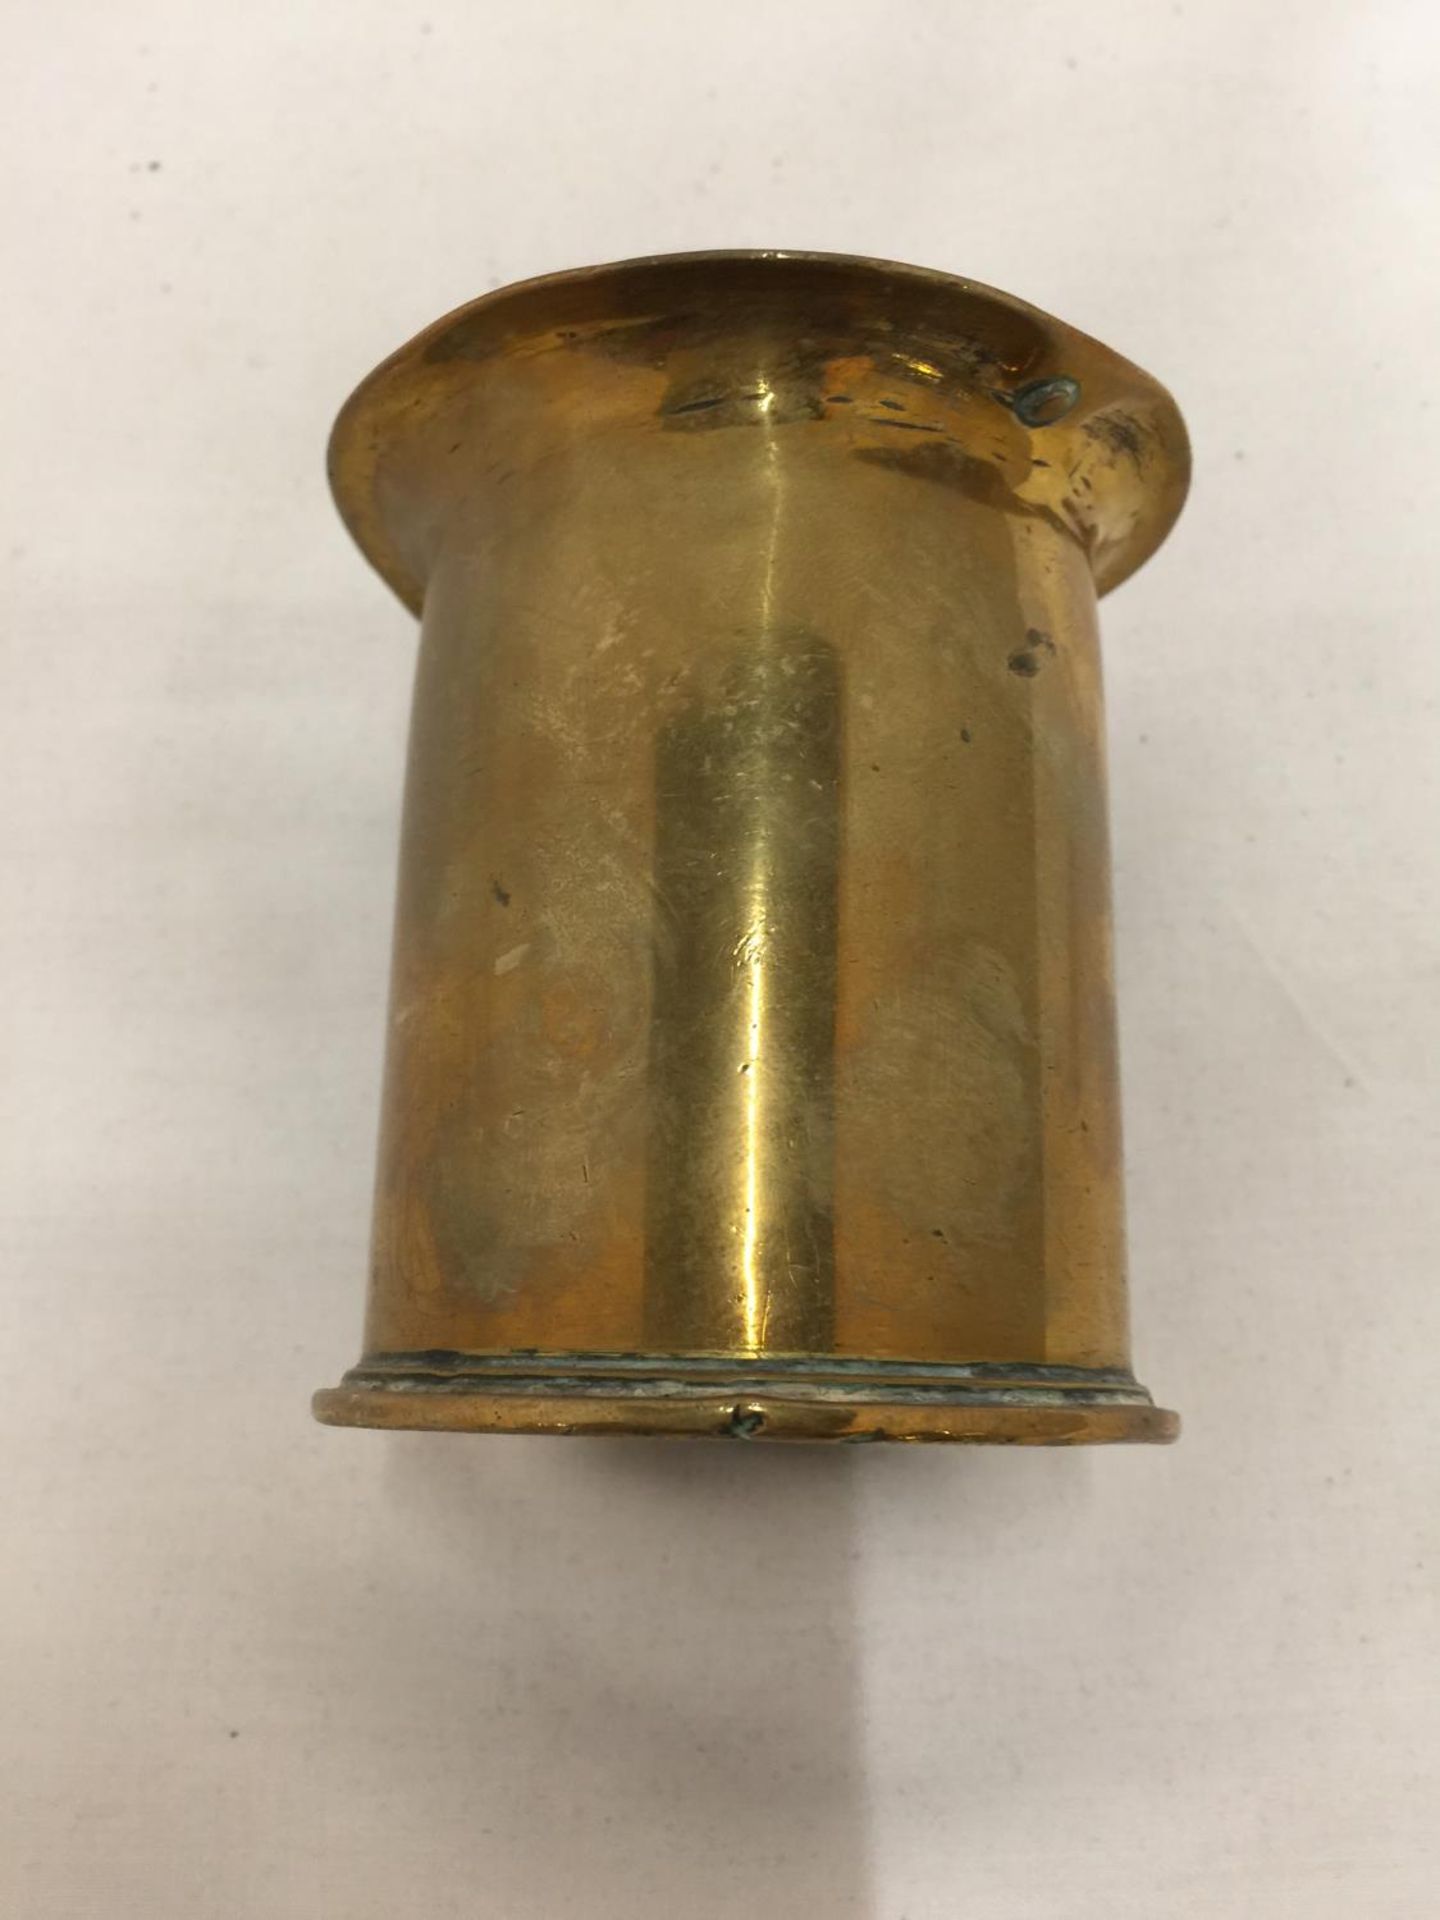 A SMALL BRASS TRENCH ART VASE HEIGHT 7.5CM - Image 3 of 4